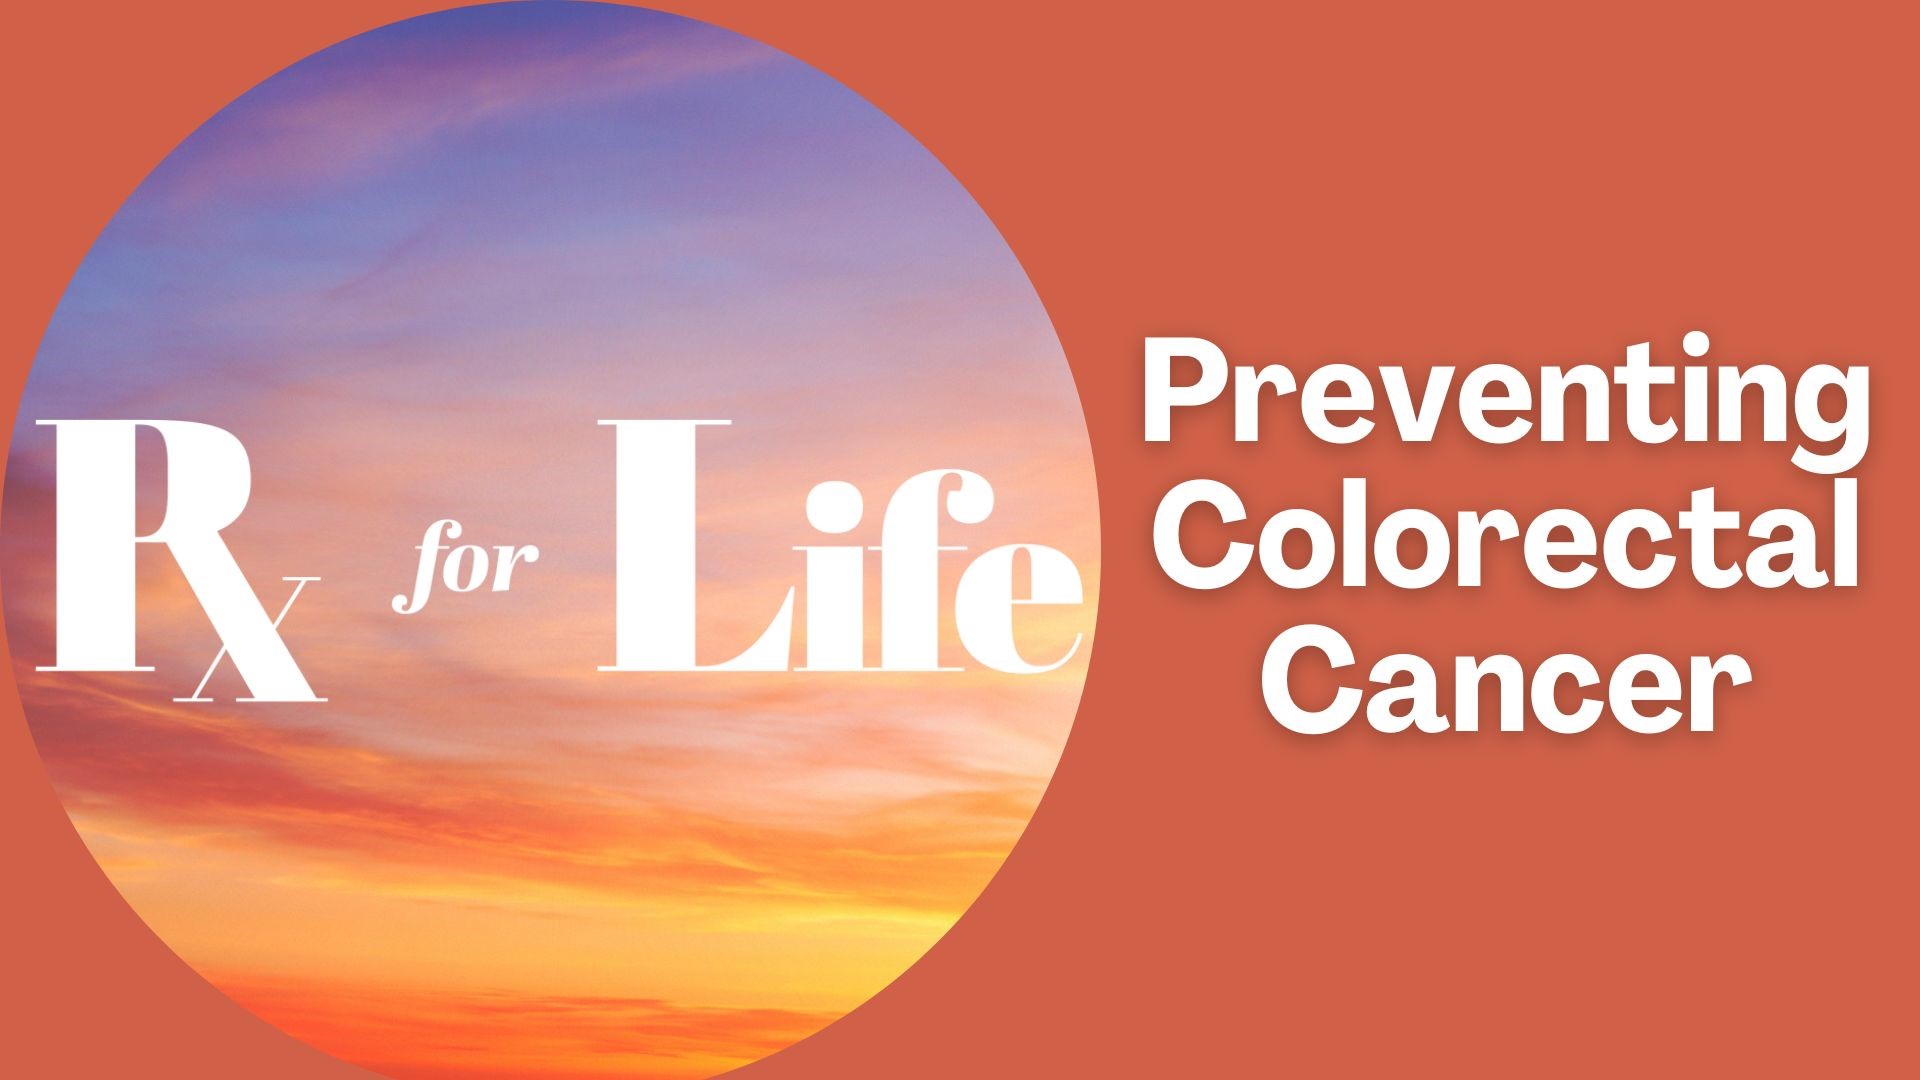 Colorectal cancer is one of the few preventable cancers. What you need to know about screening and advice from the experts.